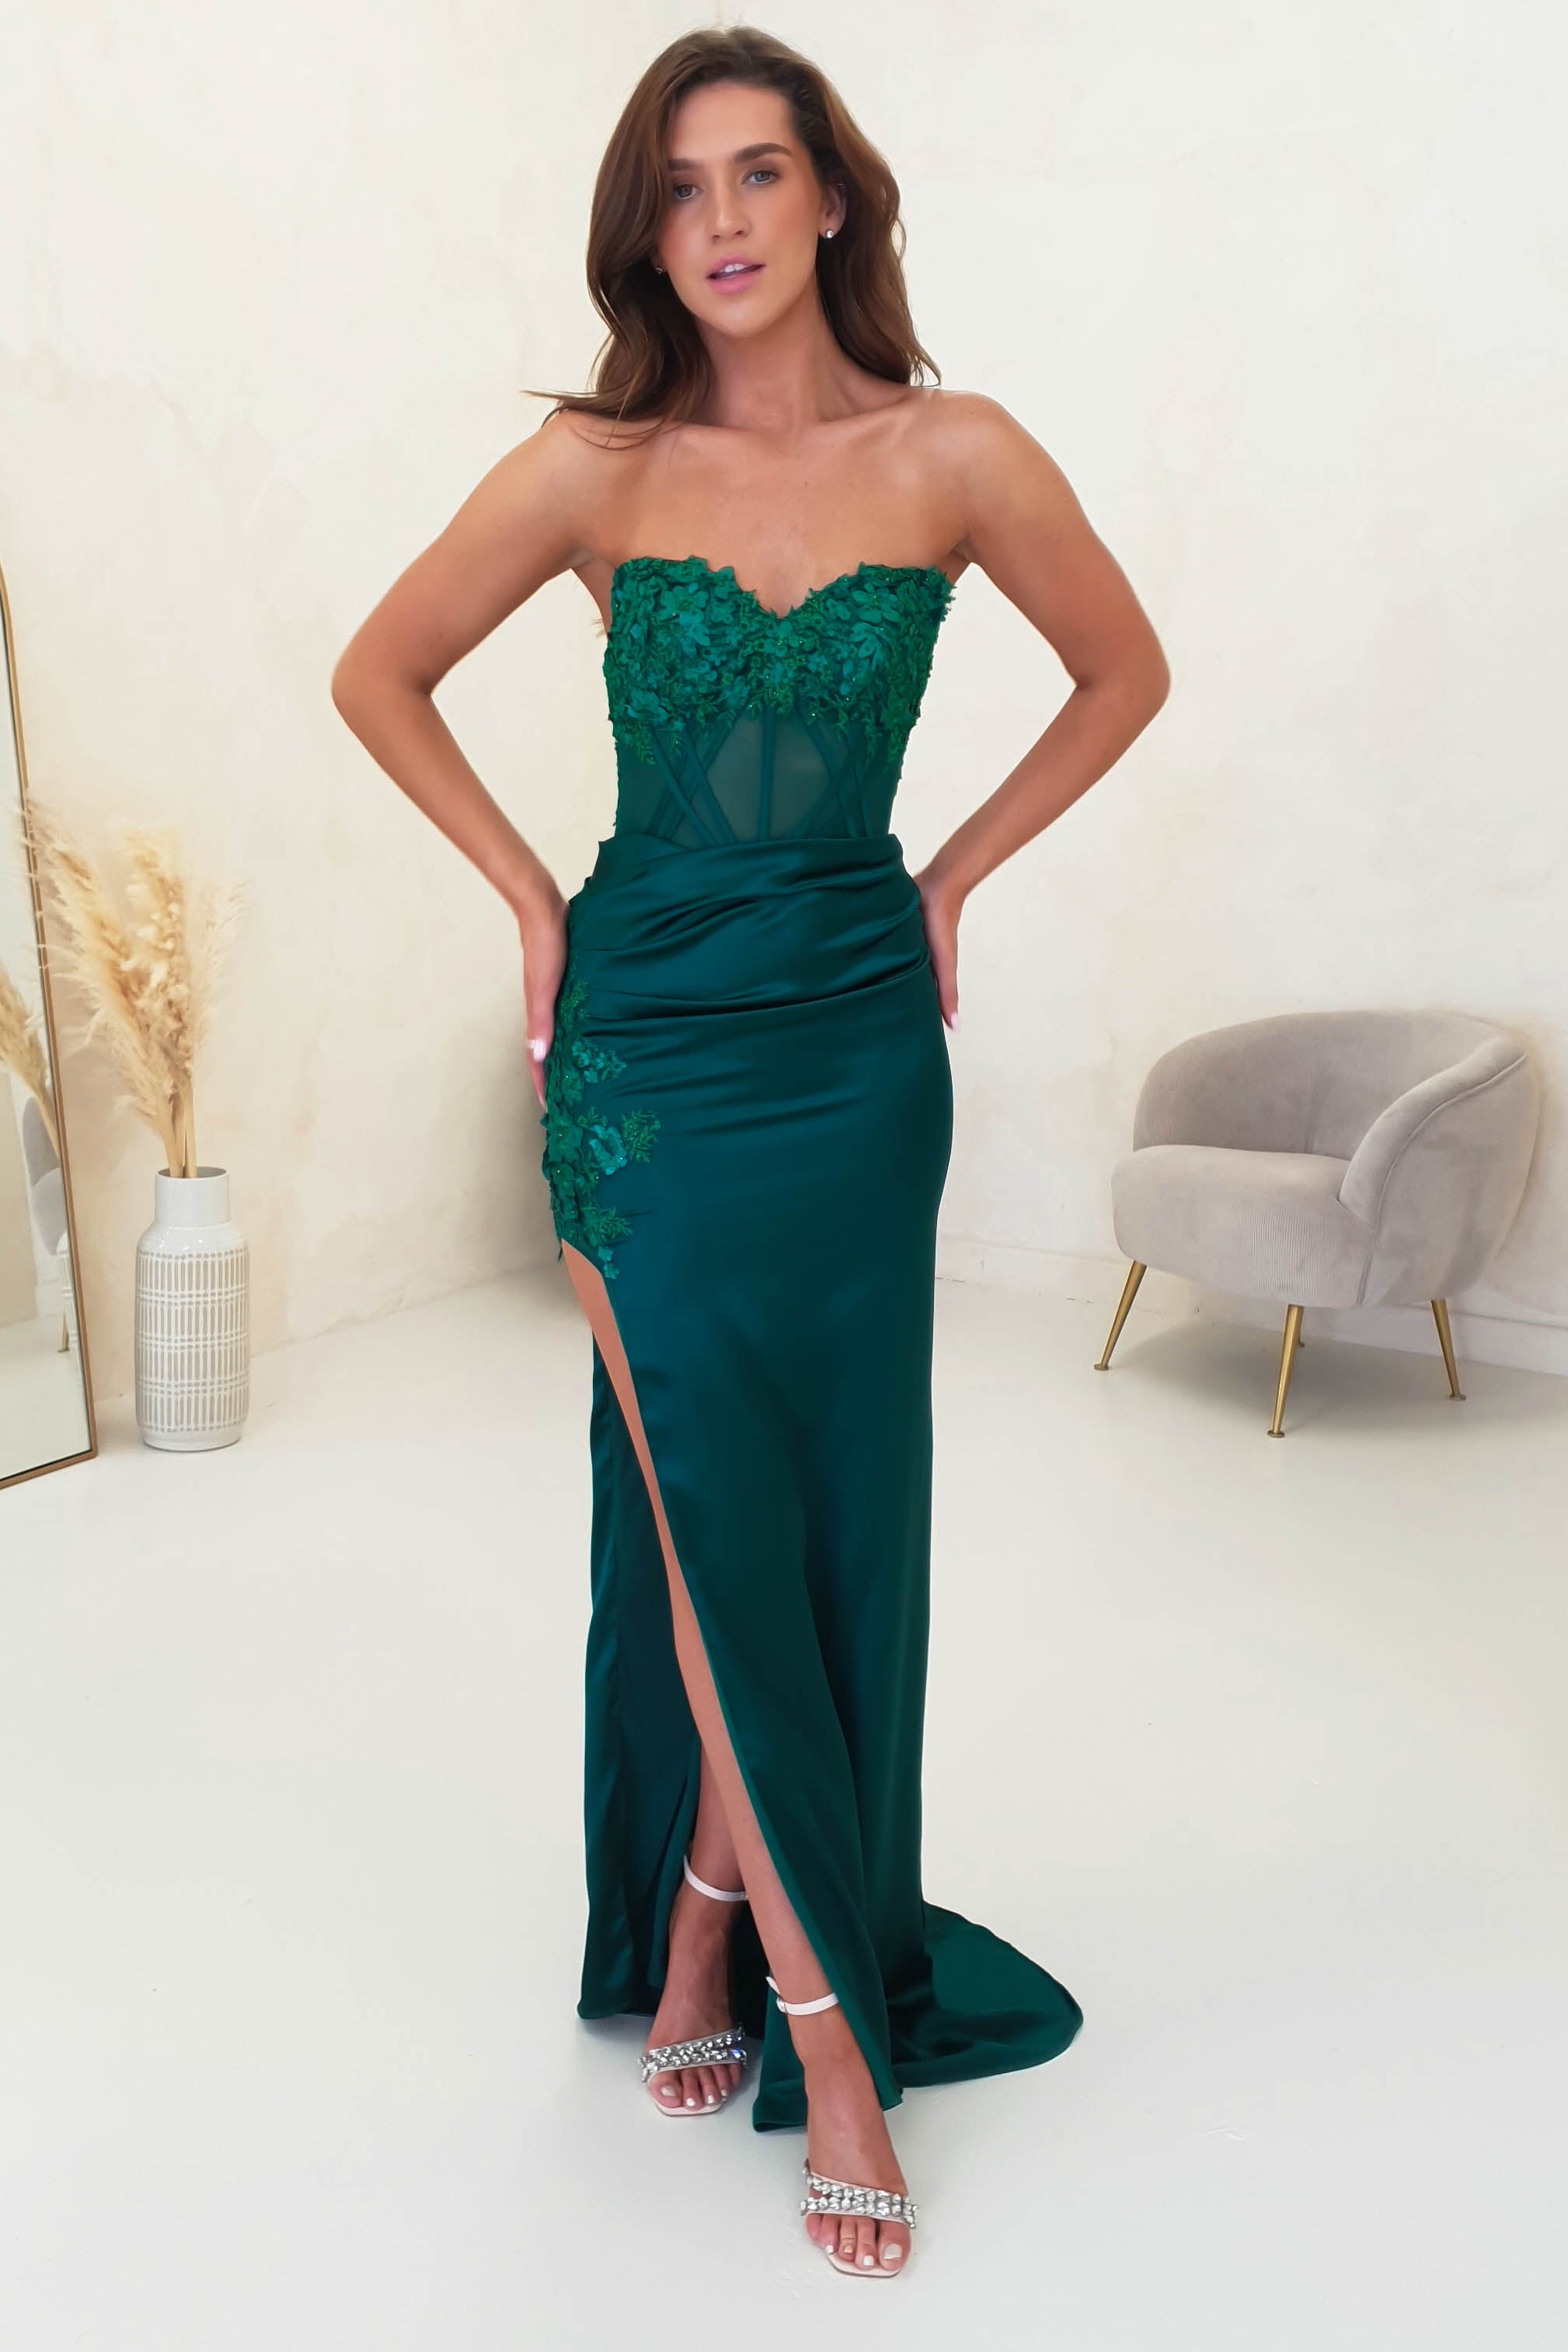 done-cd282-emerald-strapless-gown-with-flower-embellishments-emerald-green-cind-dresses-50476431409493.jpg